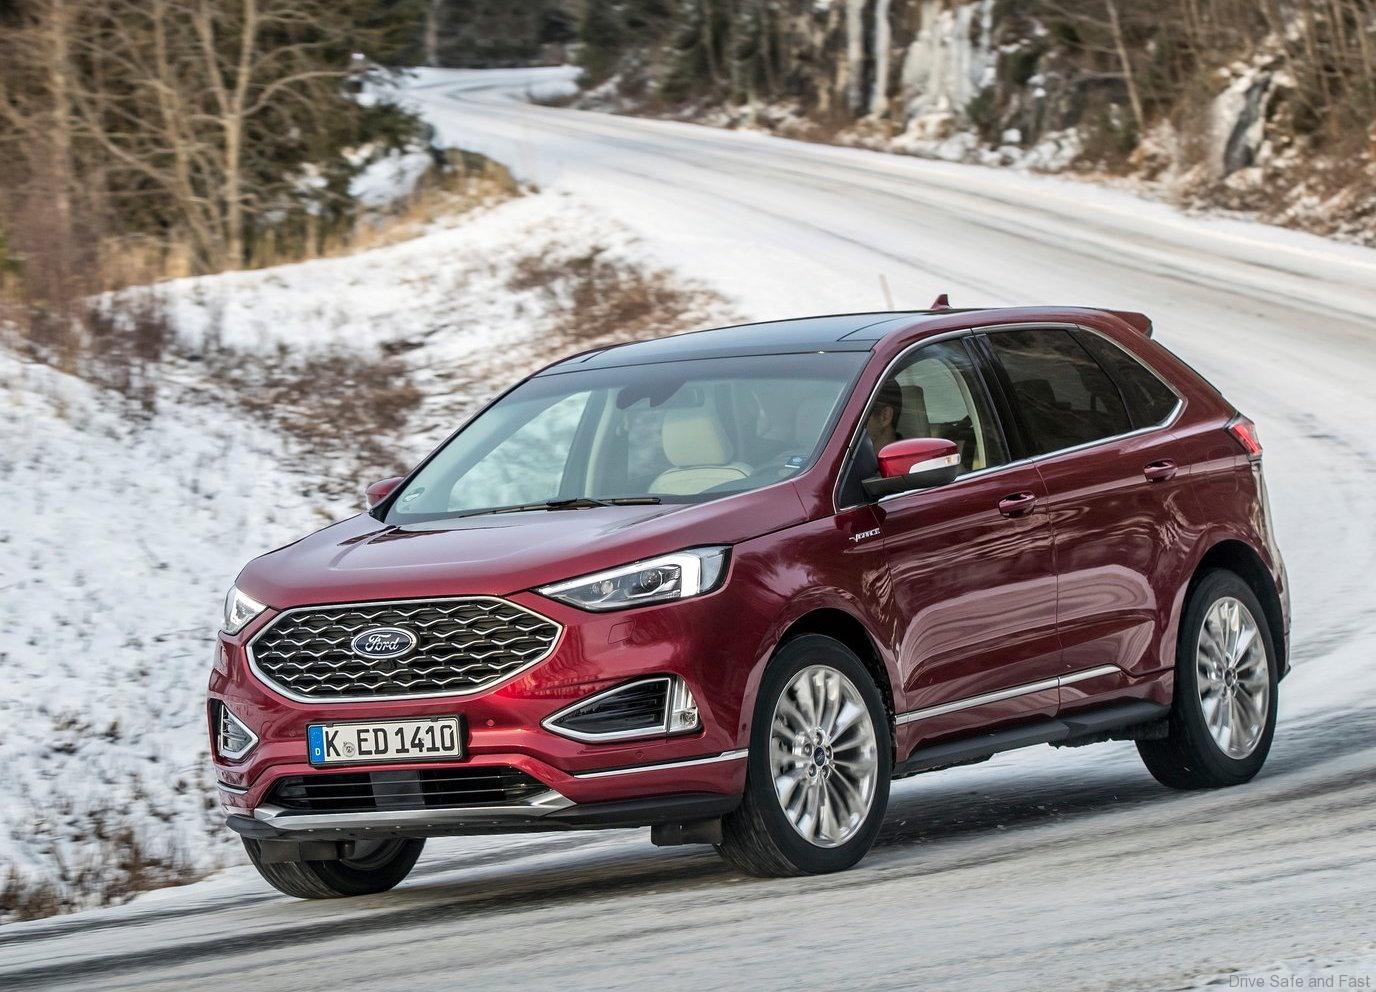 Ford Edge, the SUV we would like for Malaysia | DSF.my